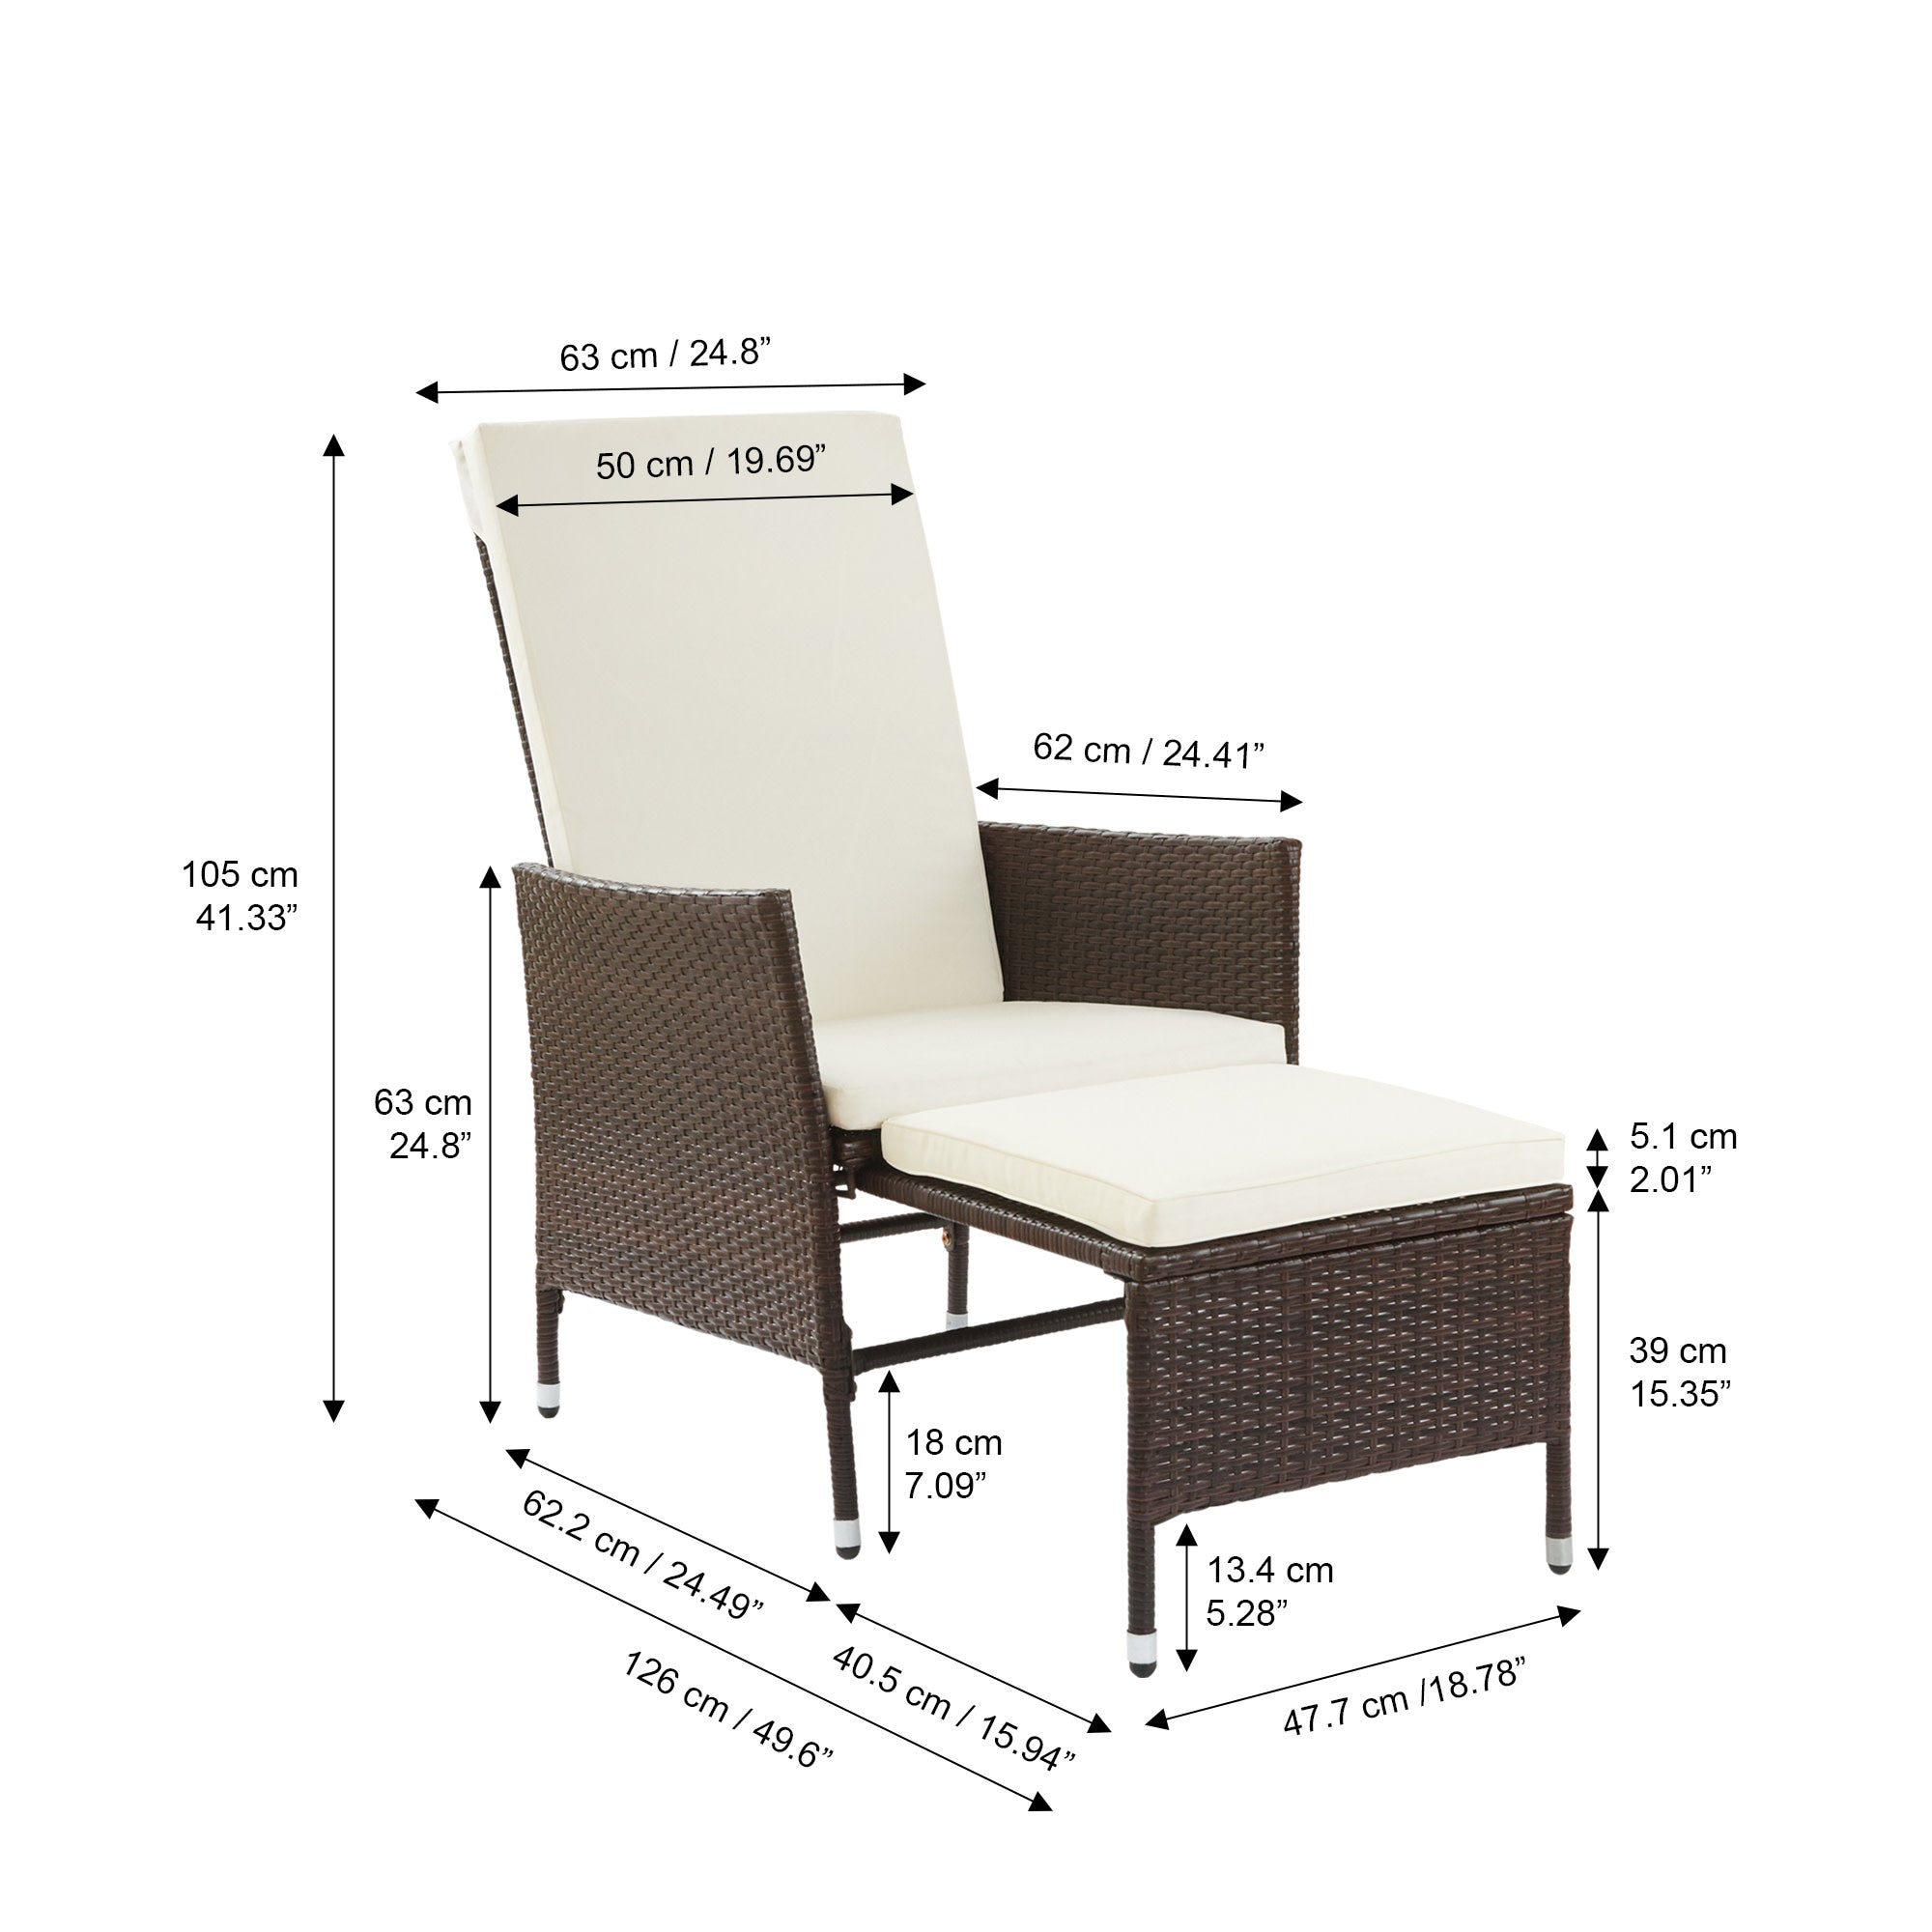 Teamson Home Outdoor PE Rattan & Wicker Patio Lounge Chair with Pull-Out Ottoman and Cushions, Brown/White